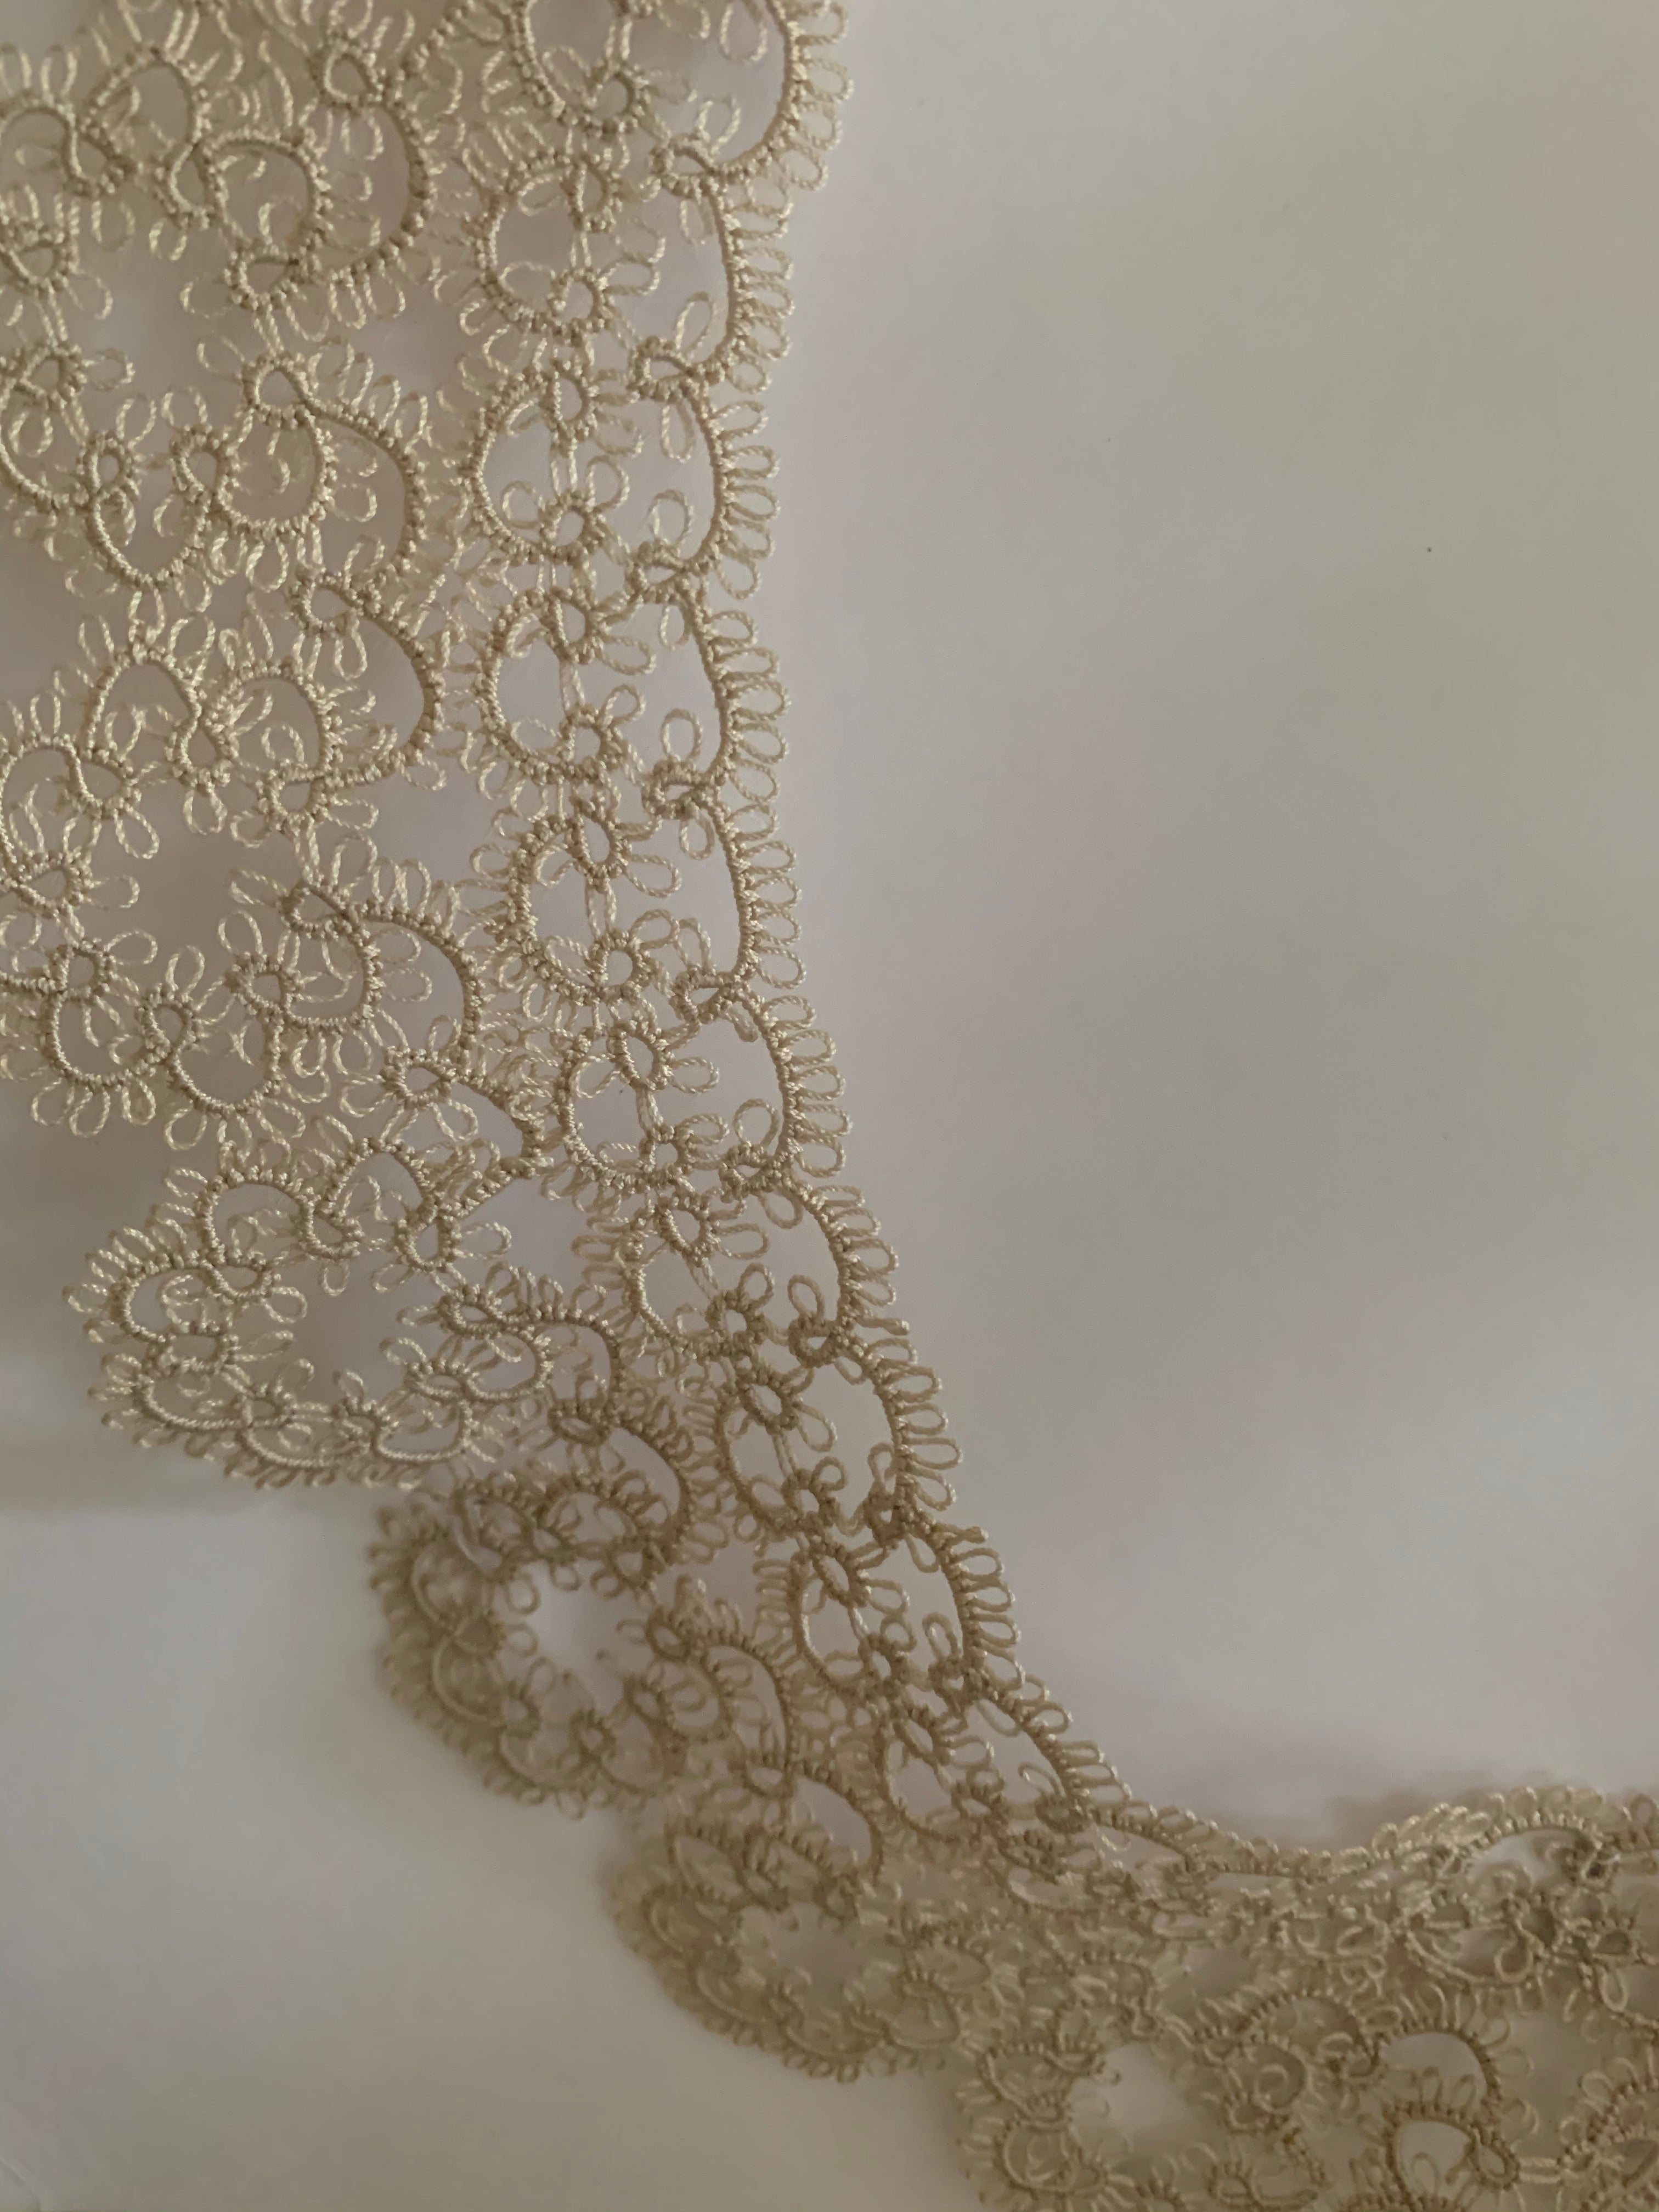 Mounted Antique Crocheted Collar